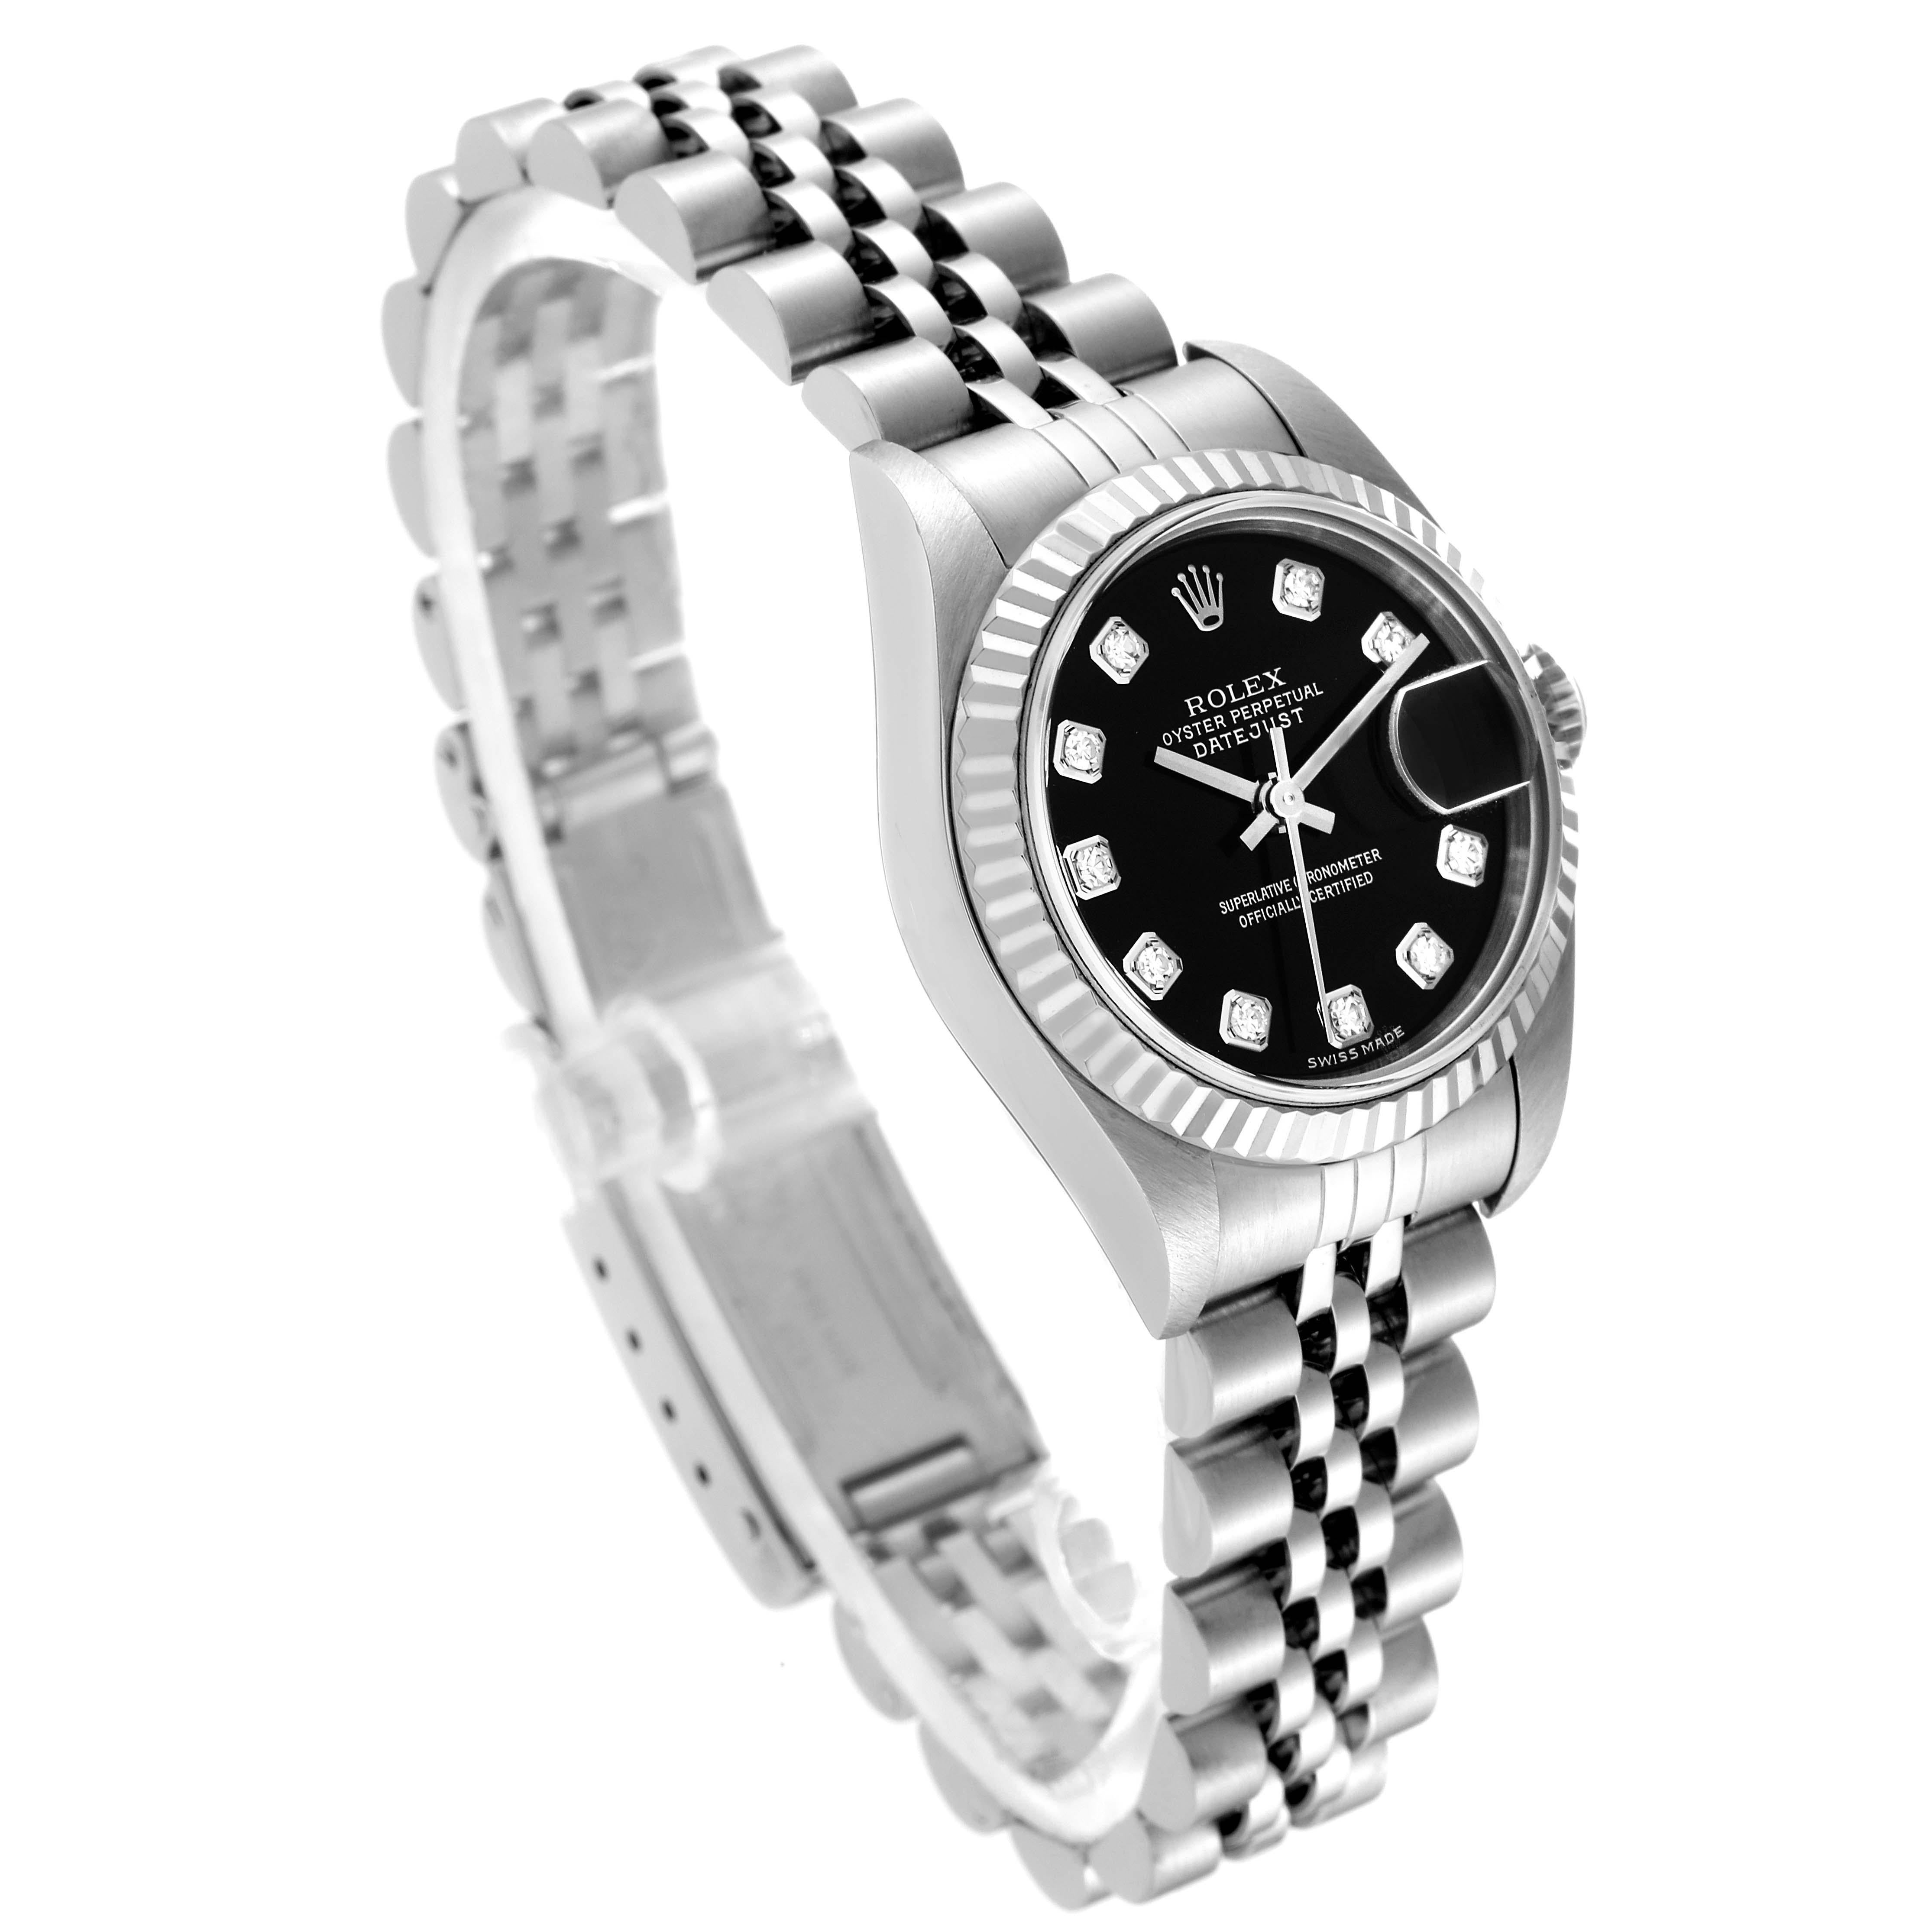 Rolex Datejust Black Diamond Dial White Gold Steel Ladies Watch 79174 Box Papers 2